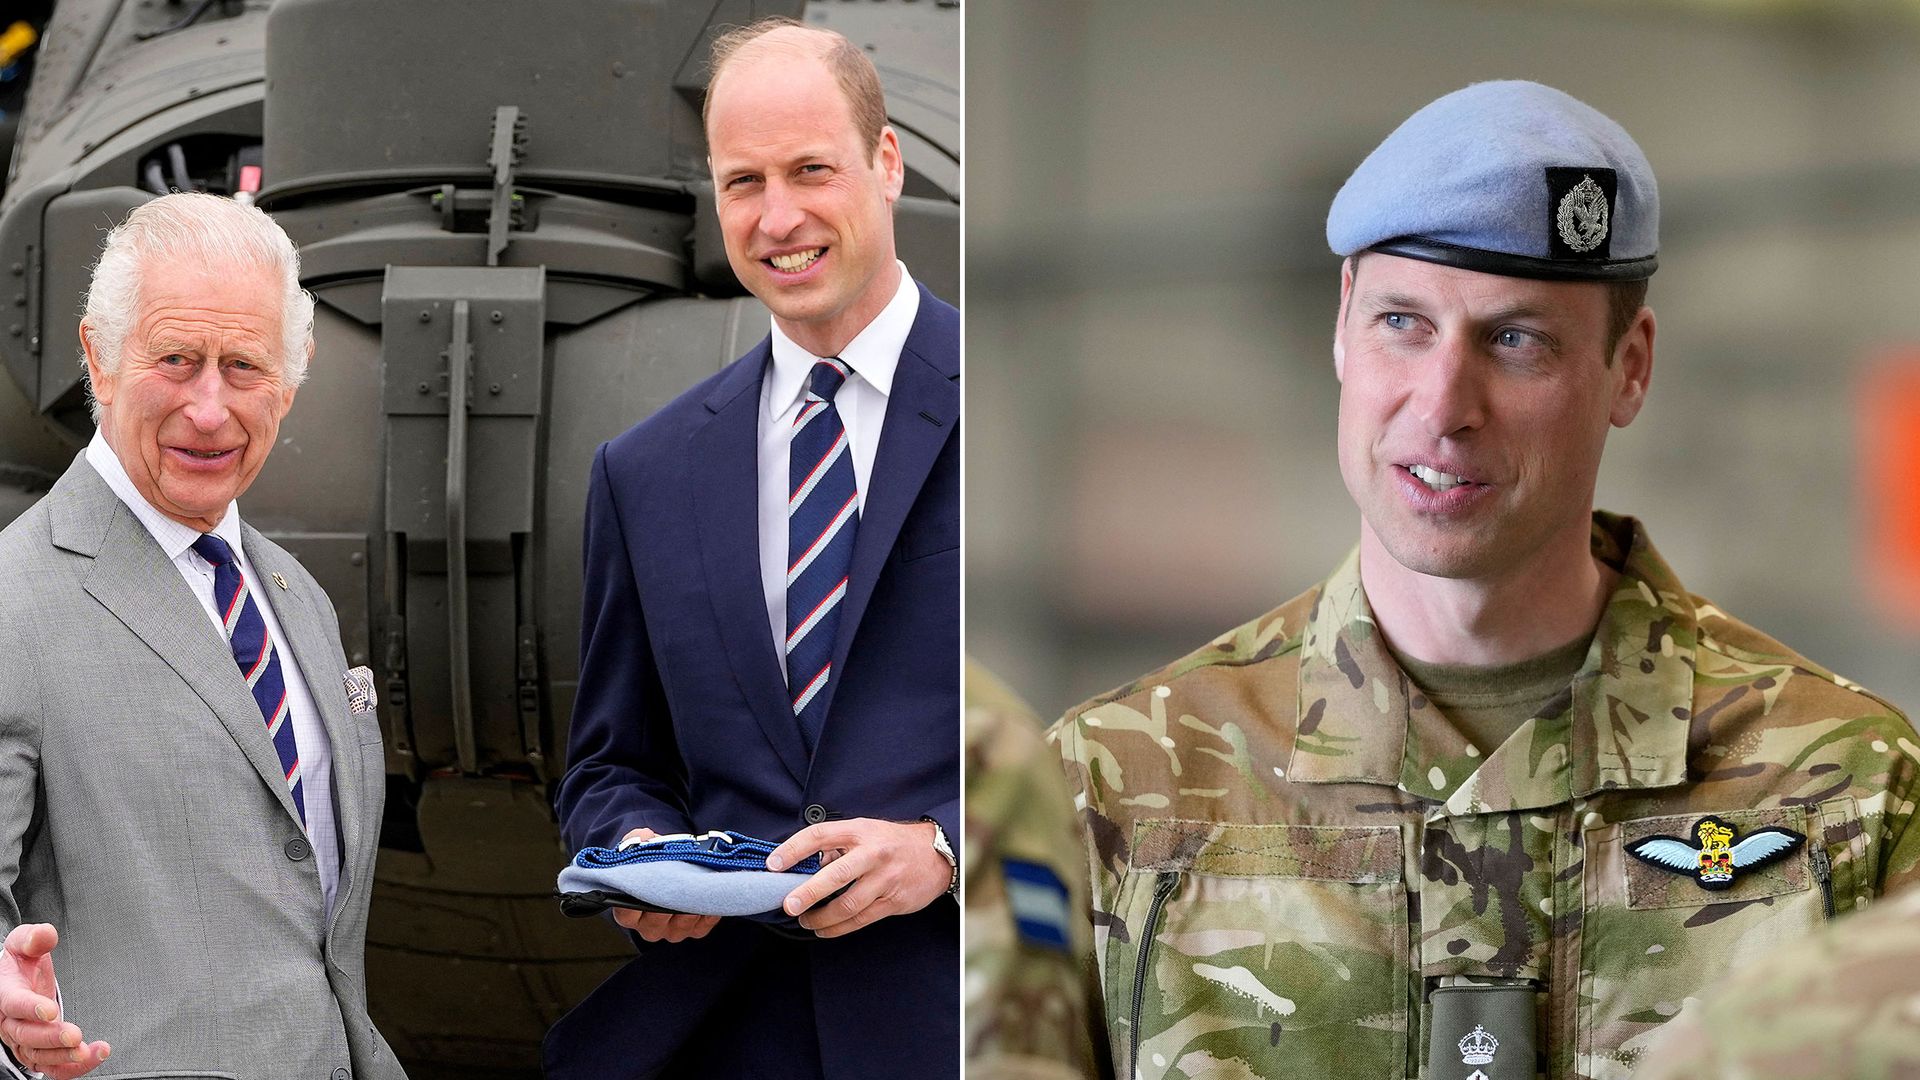 King Charles praises son Prince William as a 'very good pilot' as he hands over military role - best photos